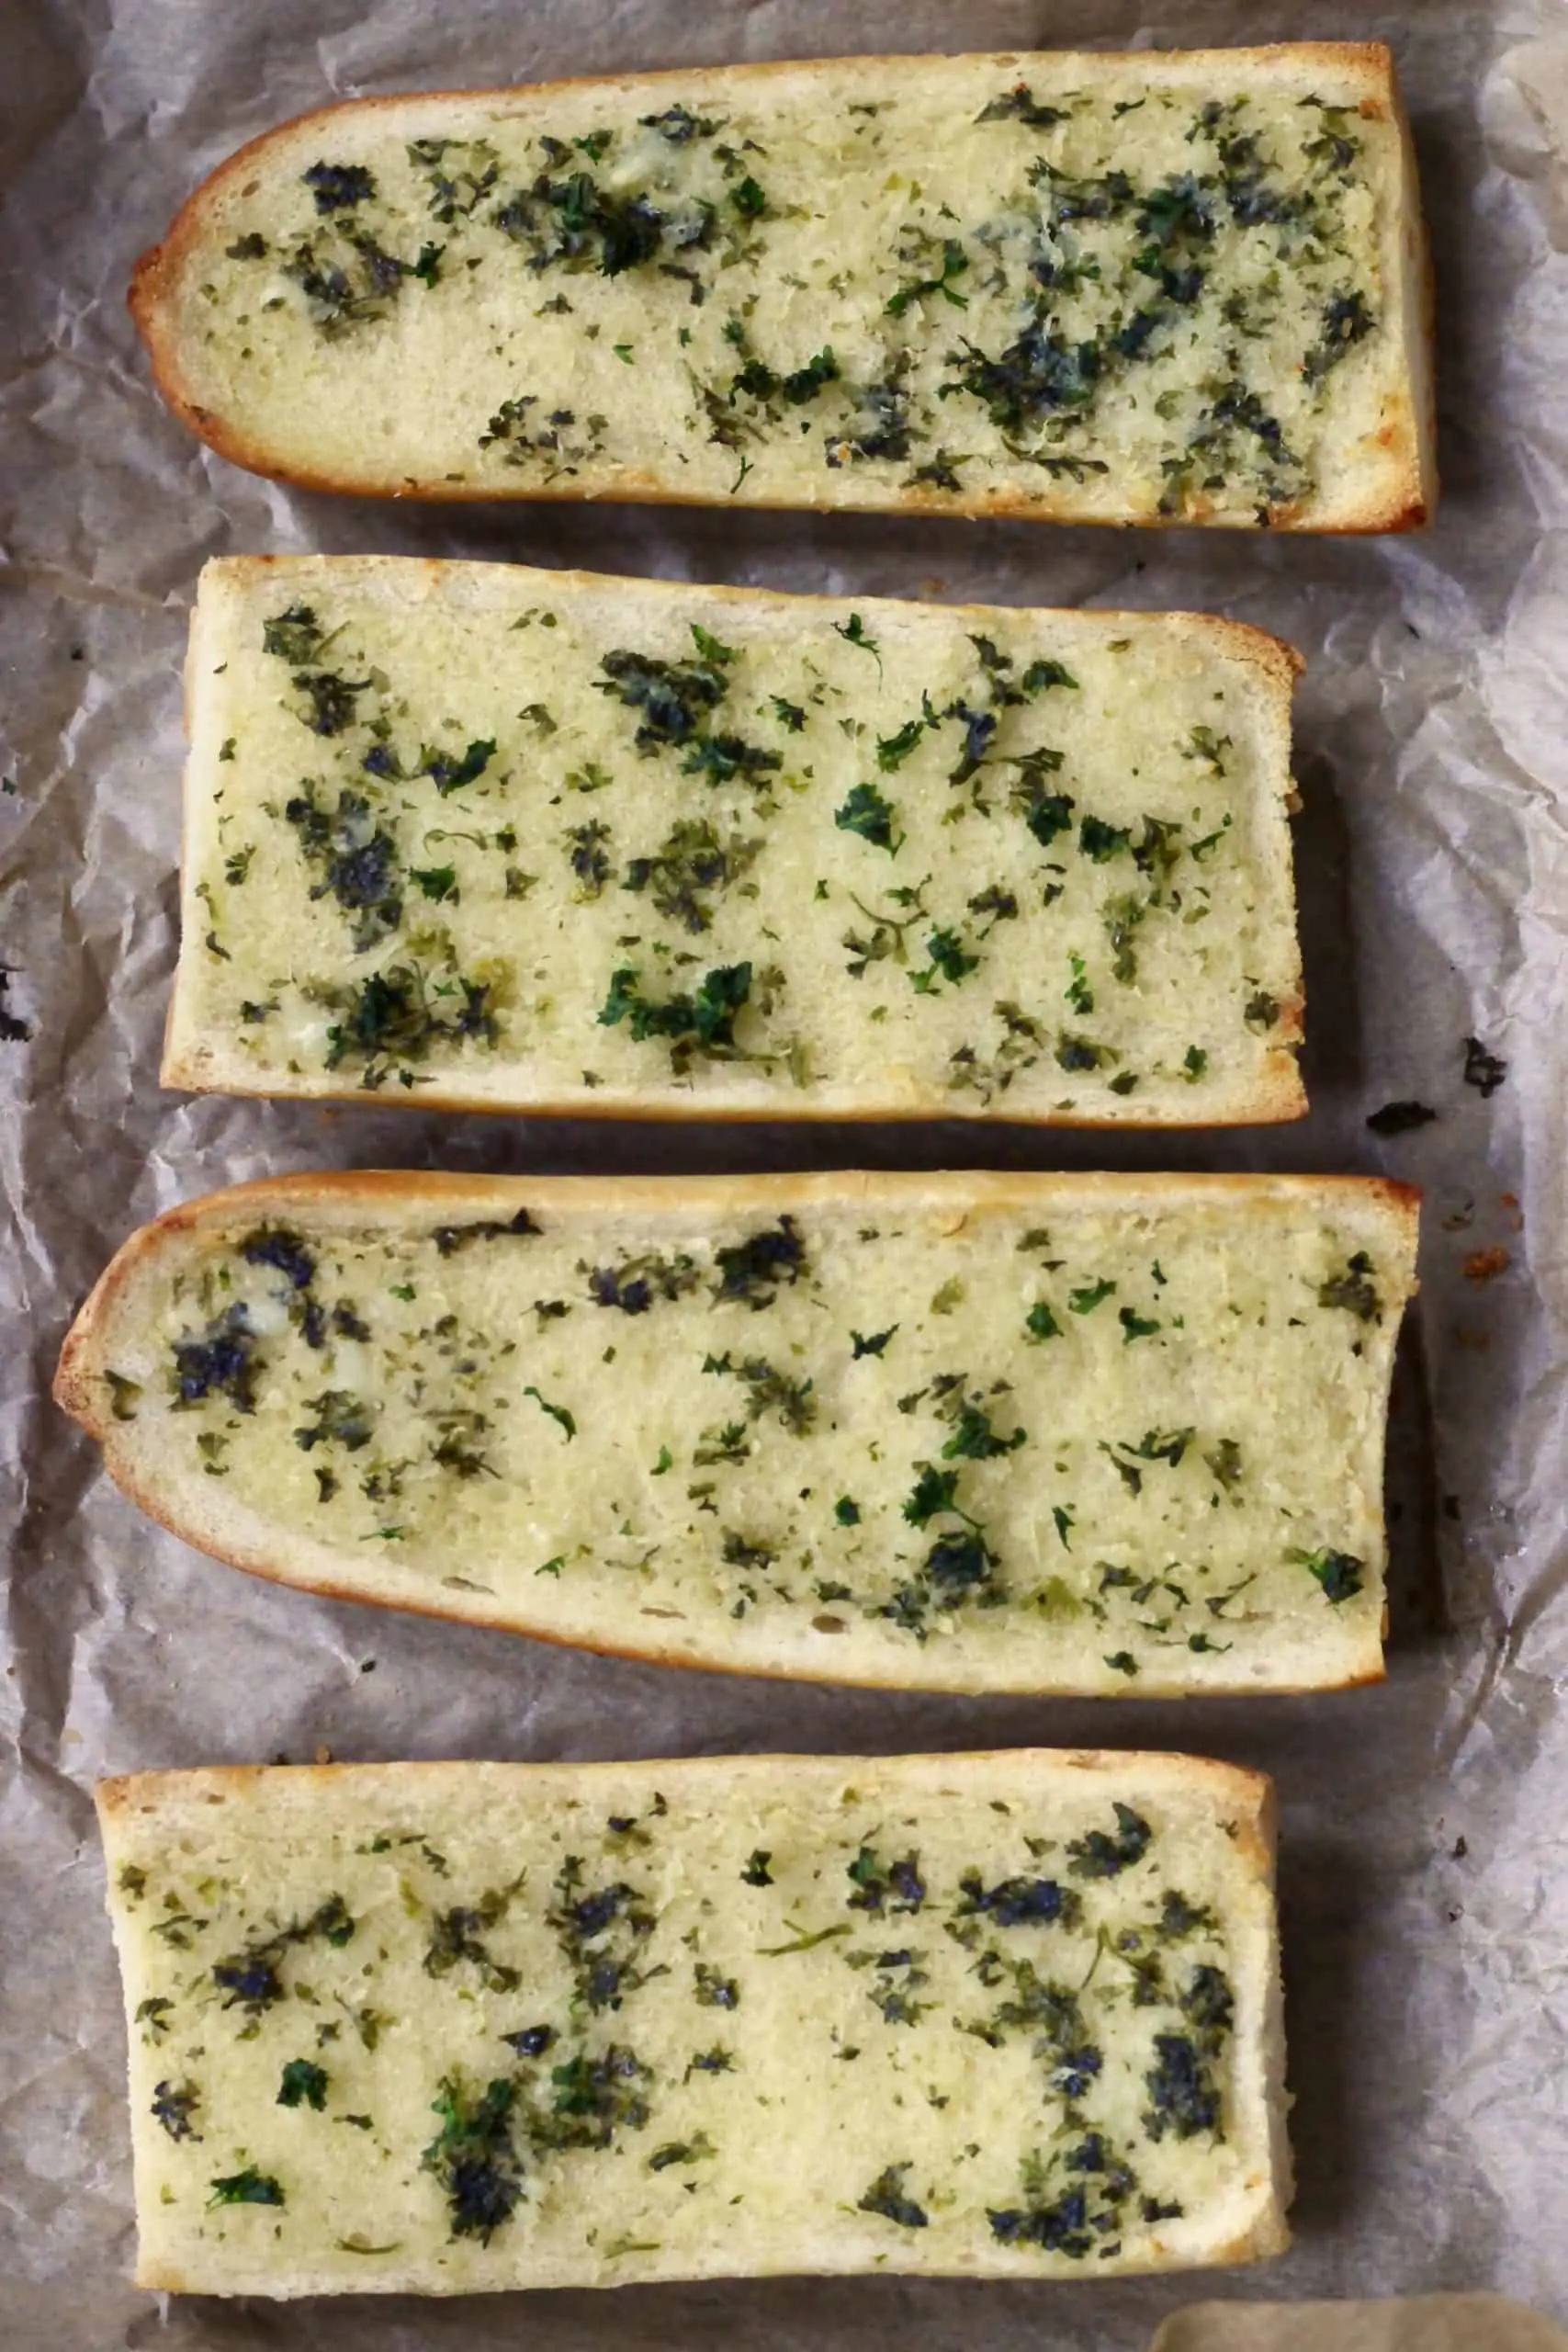 Four pieces of garlic bread on a sheet of brown baking paper